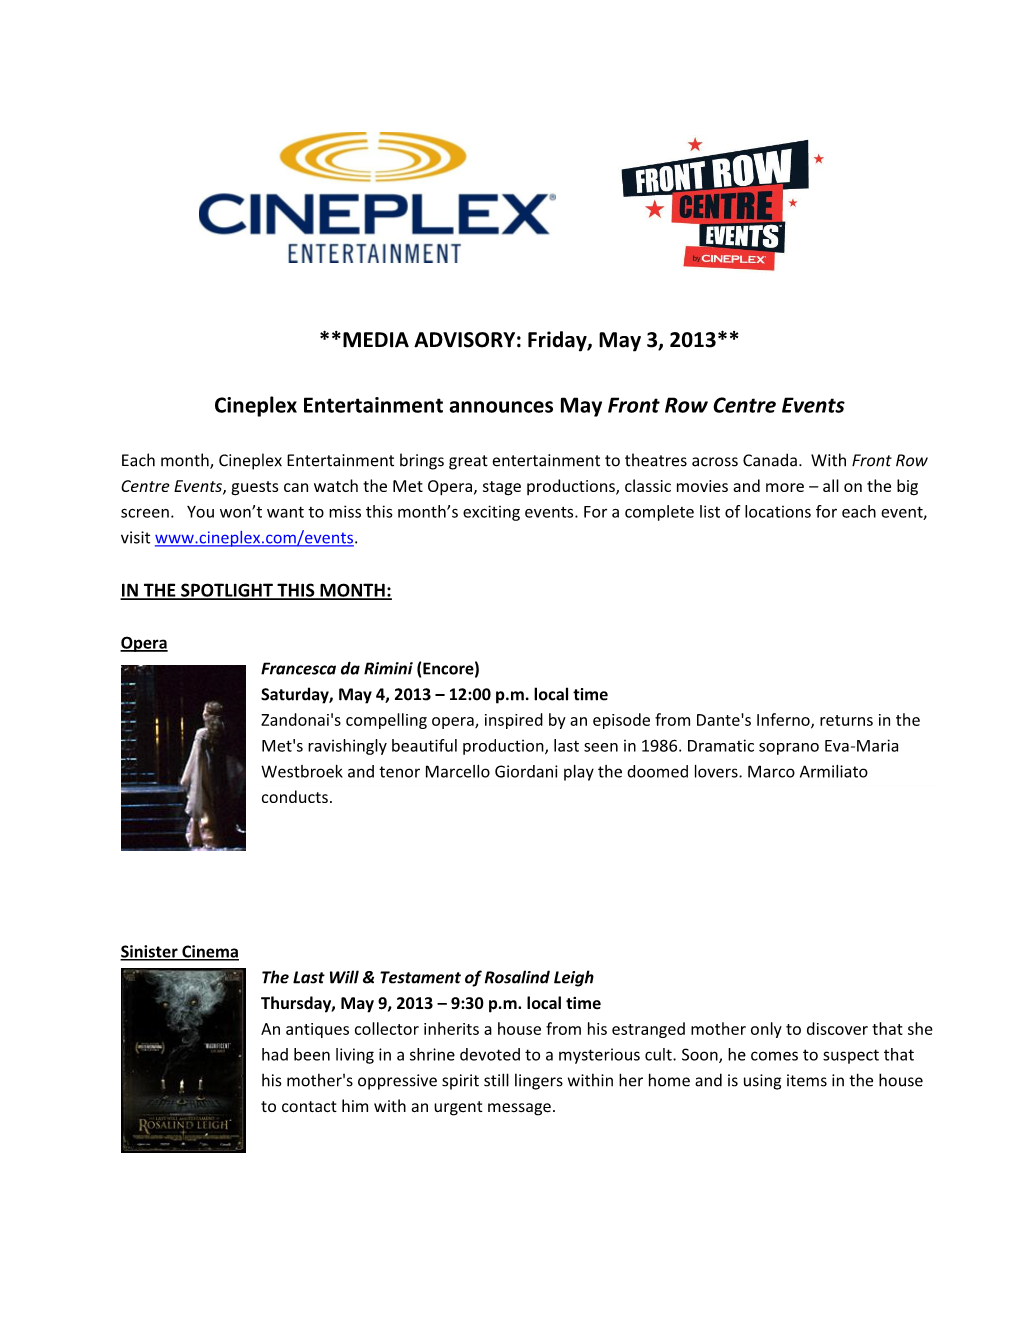 **MEDIA ADVISORY: Friday, May 3, 2013** Cineplex Entertainment Announces May Front Row Centre Events